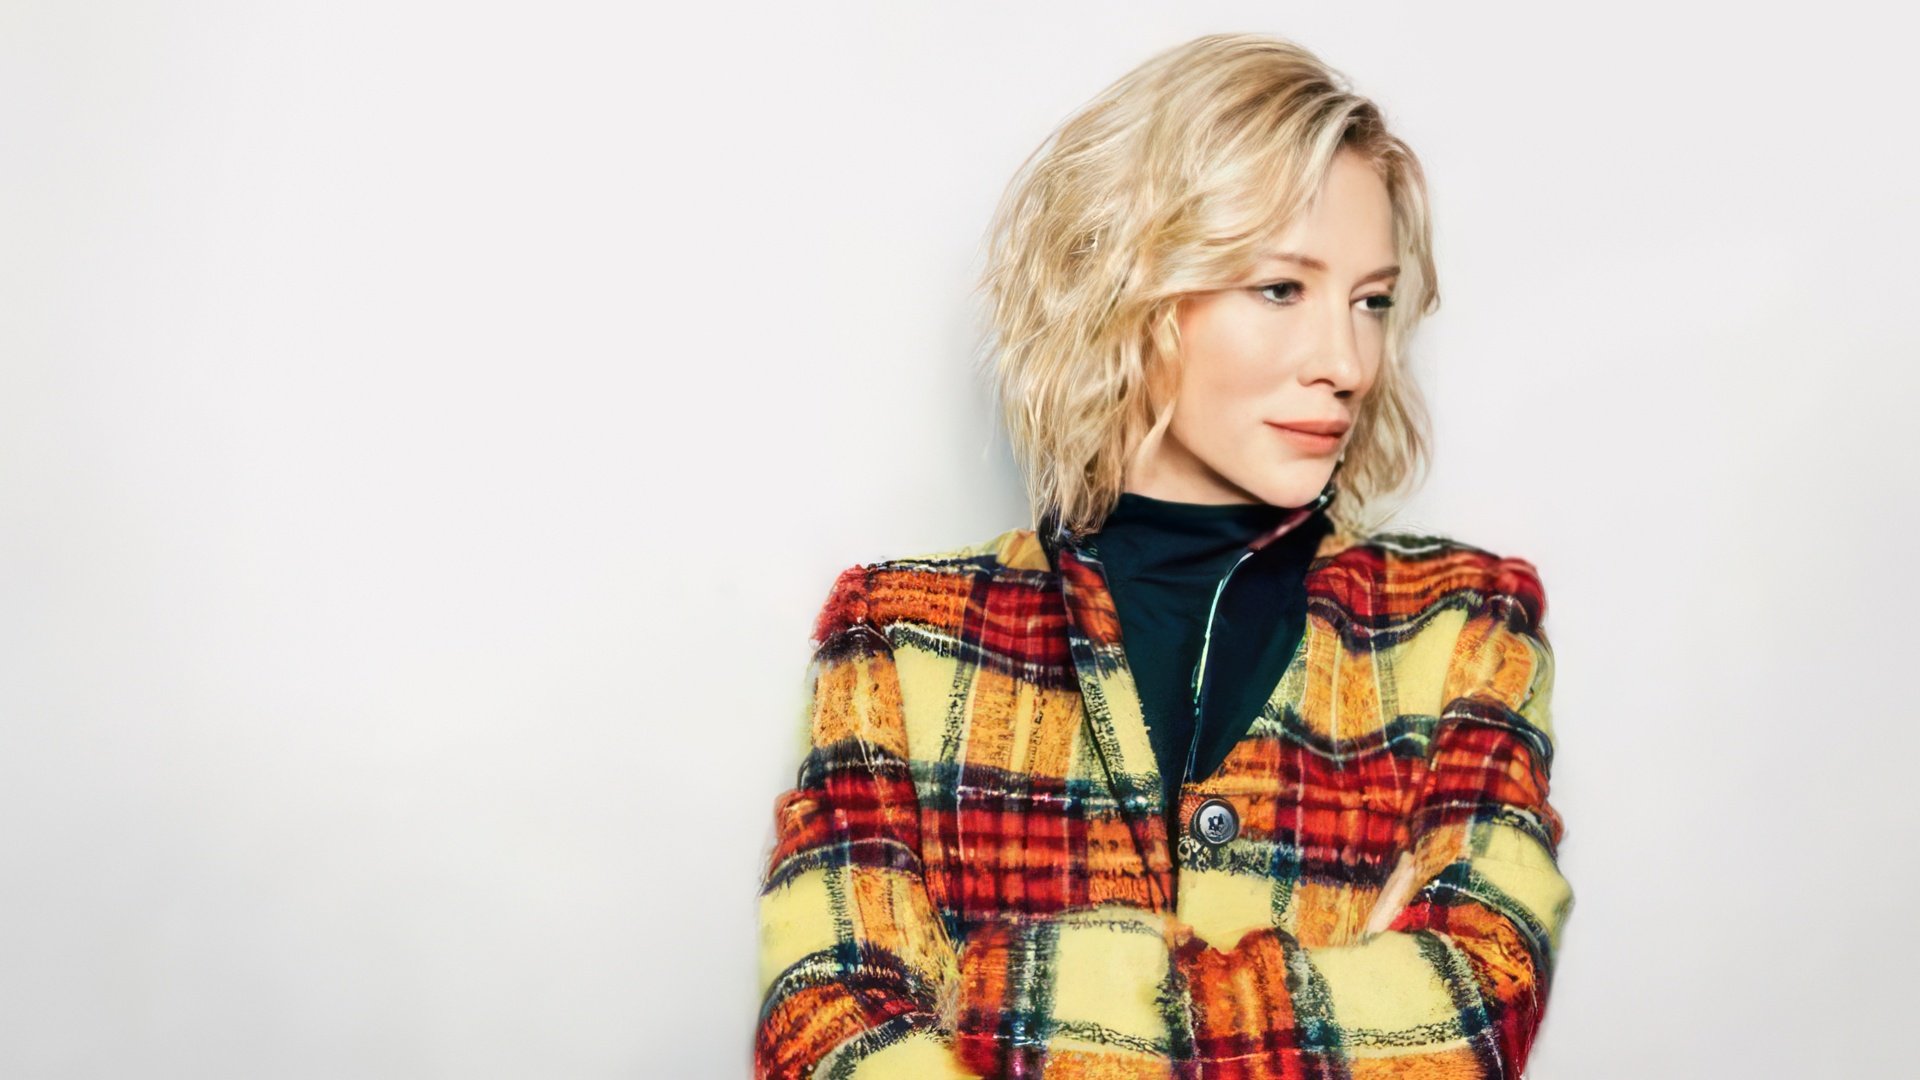 Cate Blanchett – actress, director, faithful wife and mother of four children